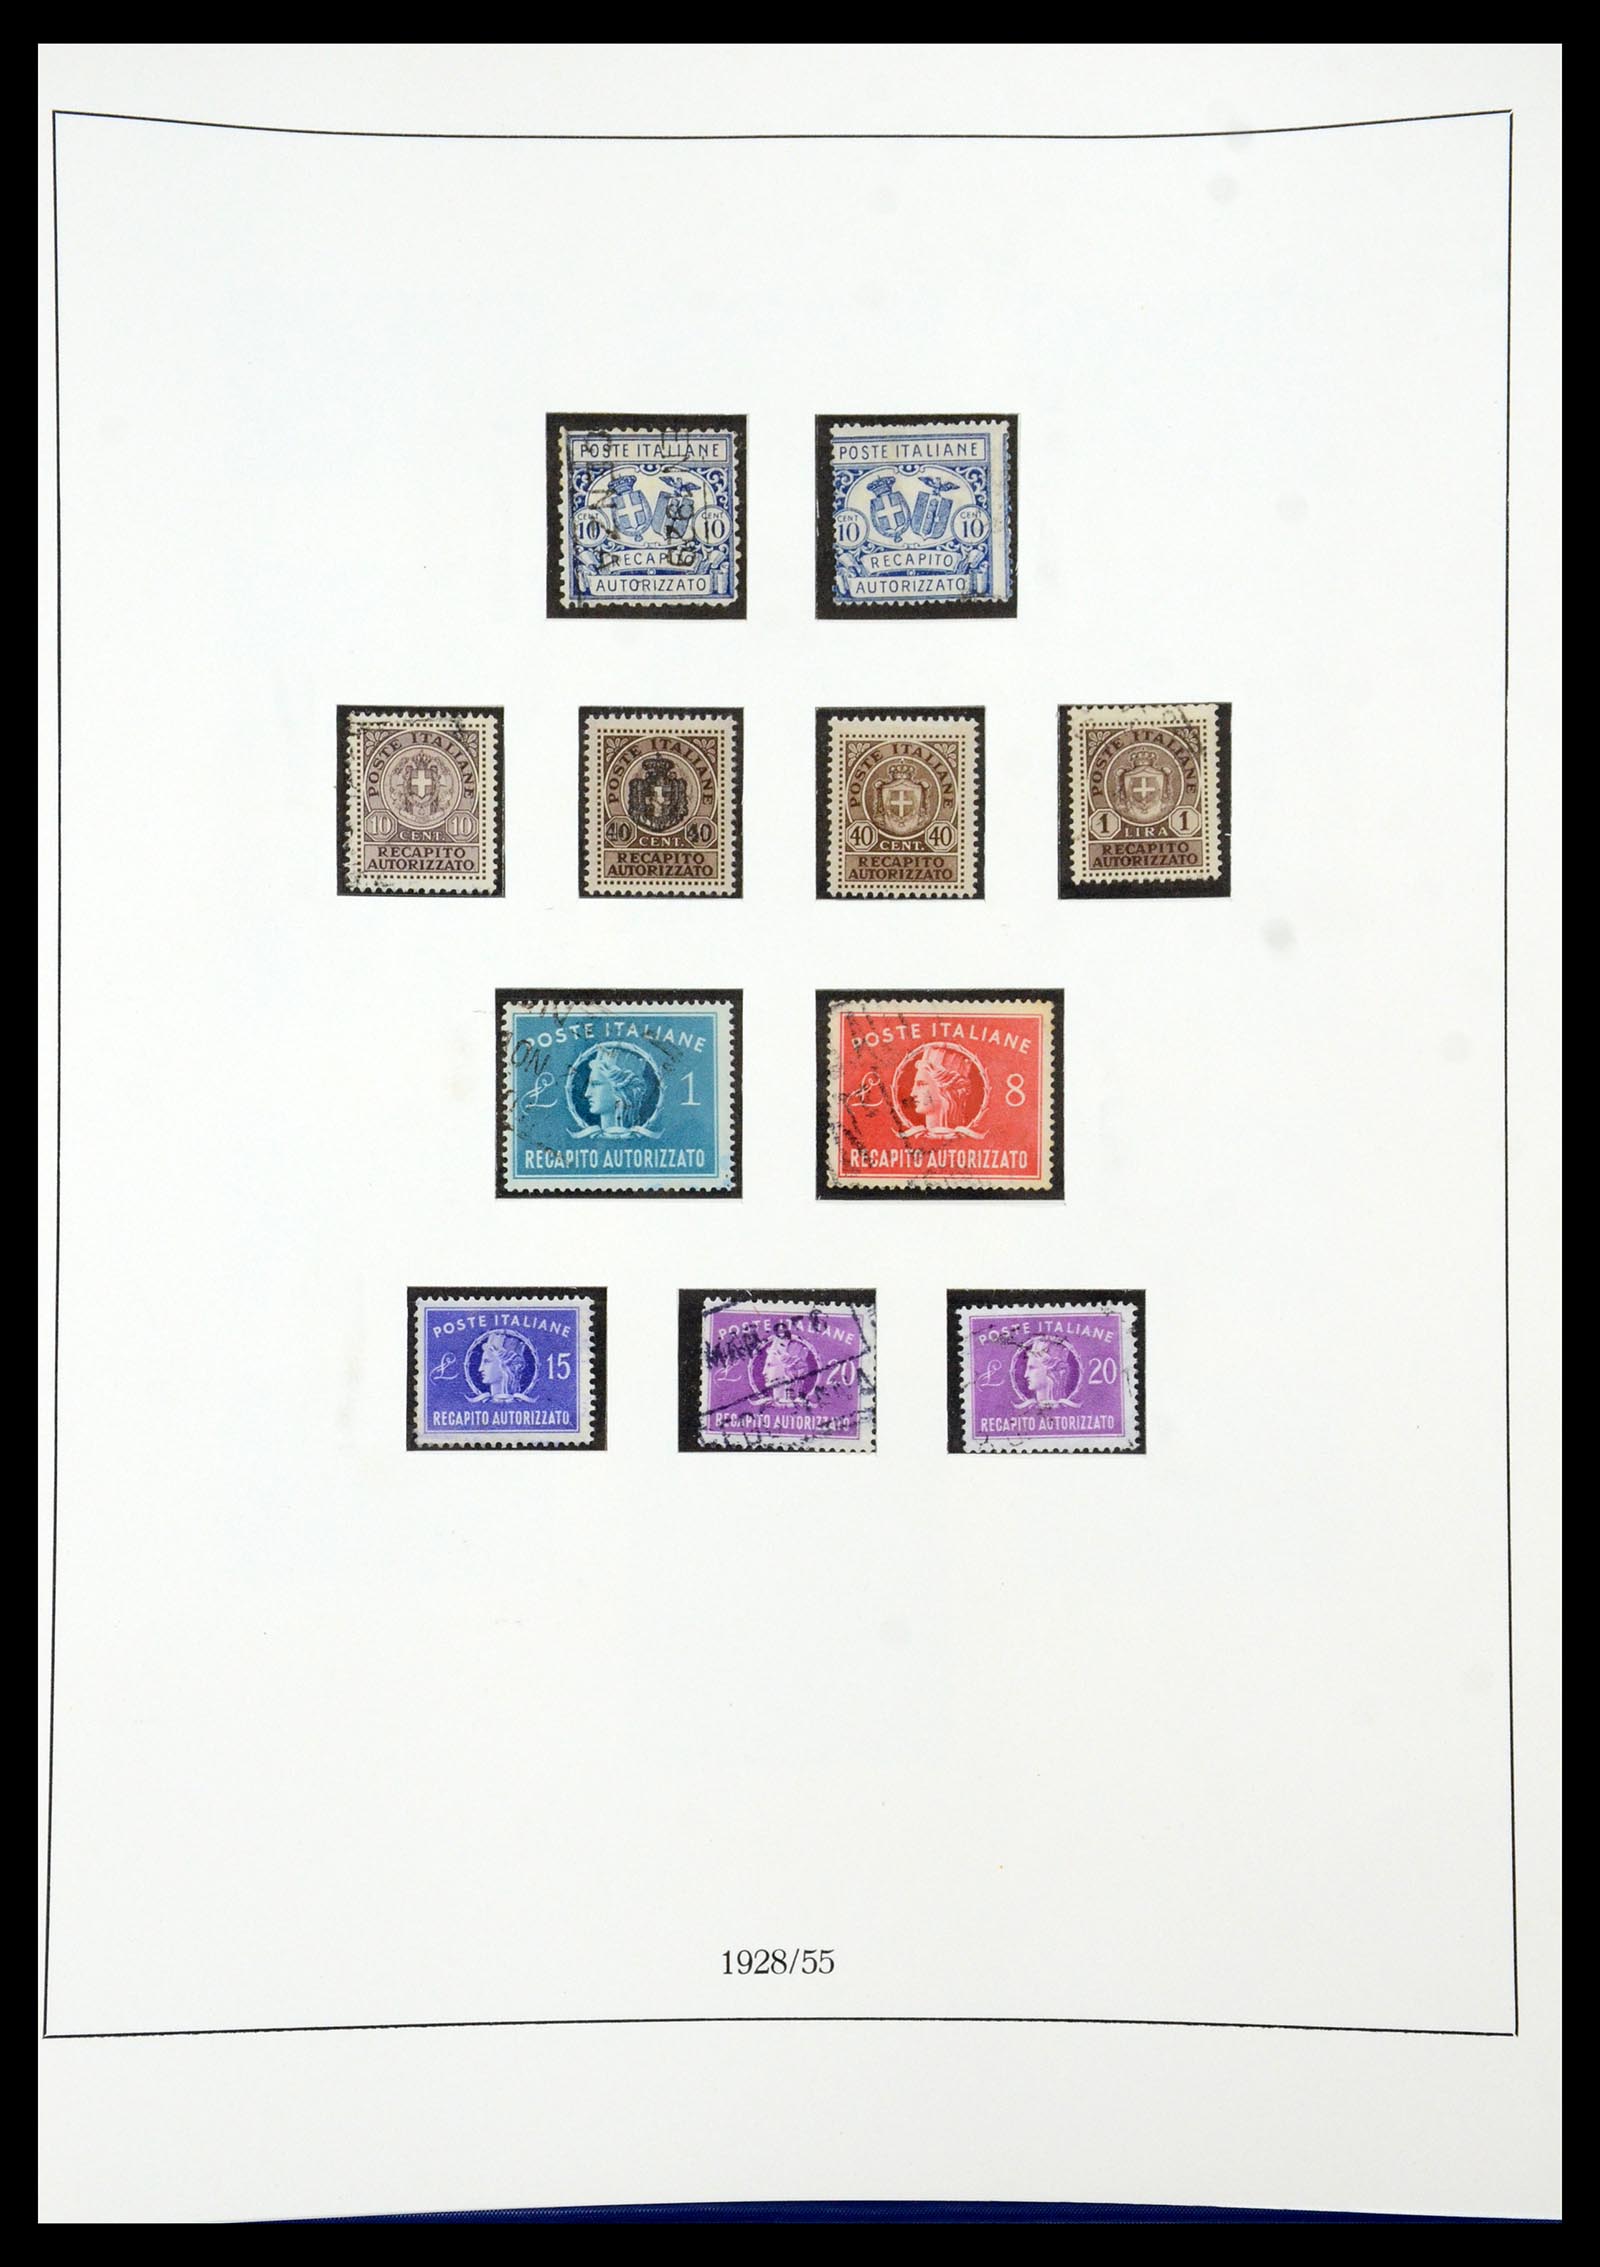 35324 048 - Stamp Collection 35324 Italy 1862-2019!